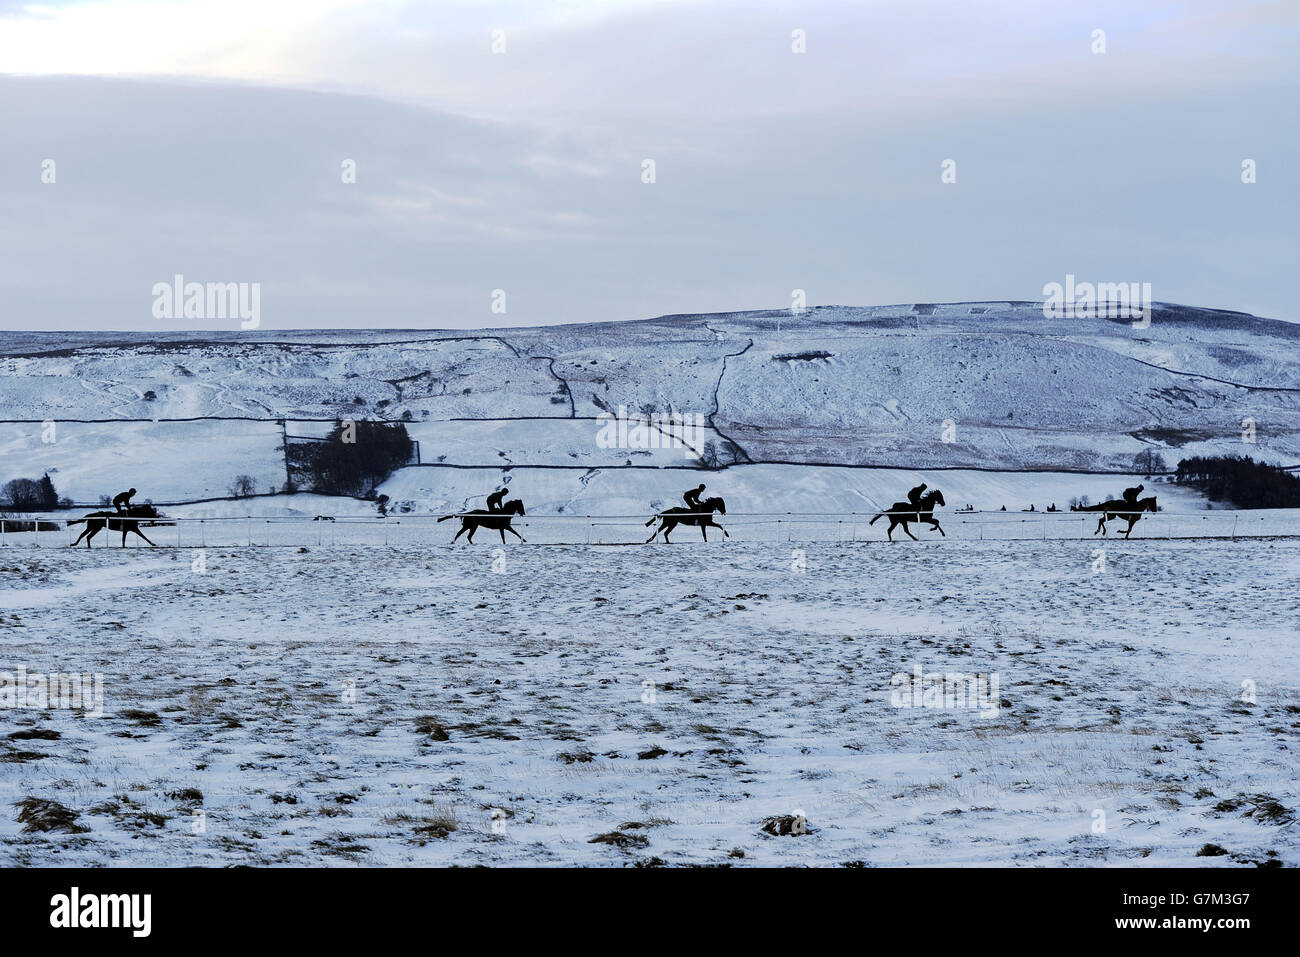 Racehorses exercise on the snowy gallops at Middleham, as Britons were warned to brace themselves for fresh disruption today as snow freezes over, bringing potentially perilous road conditions. Stock Photo